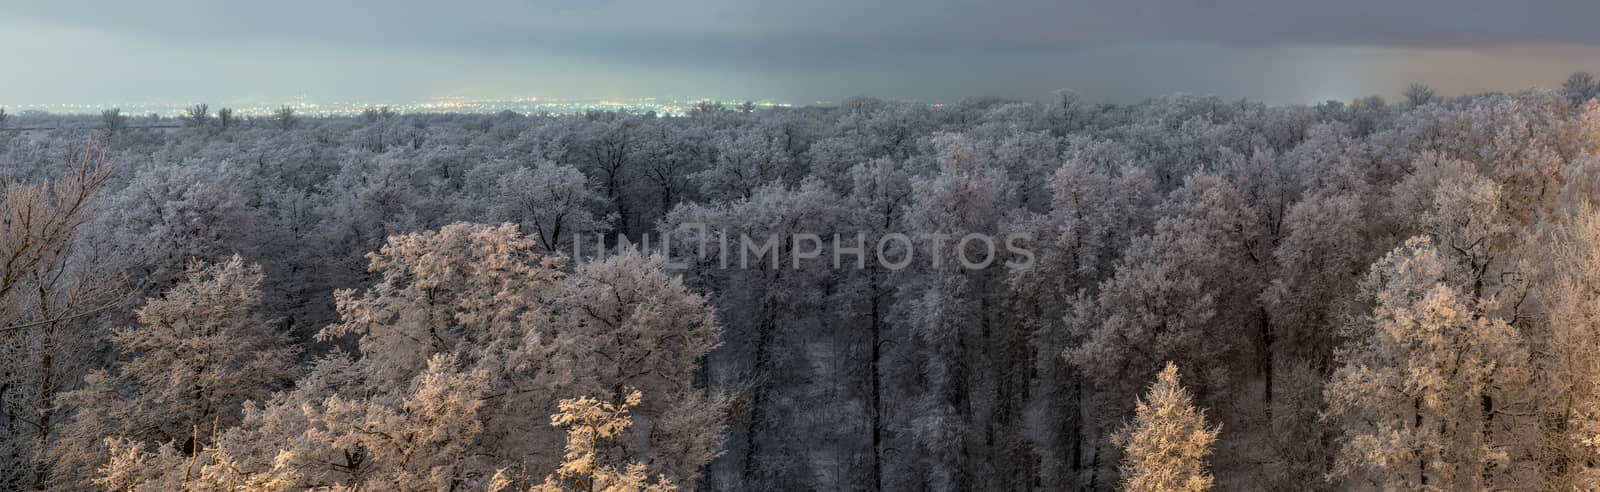 Top of frozen winter forest landscape at cloudy weather with soft light and distant city lights by z1b